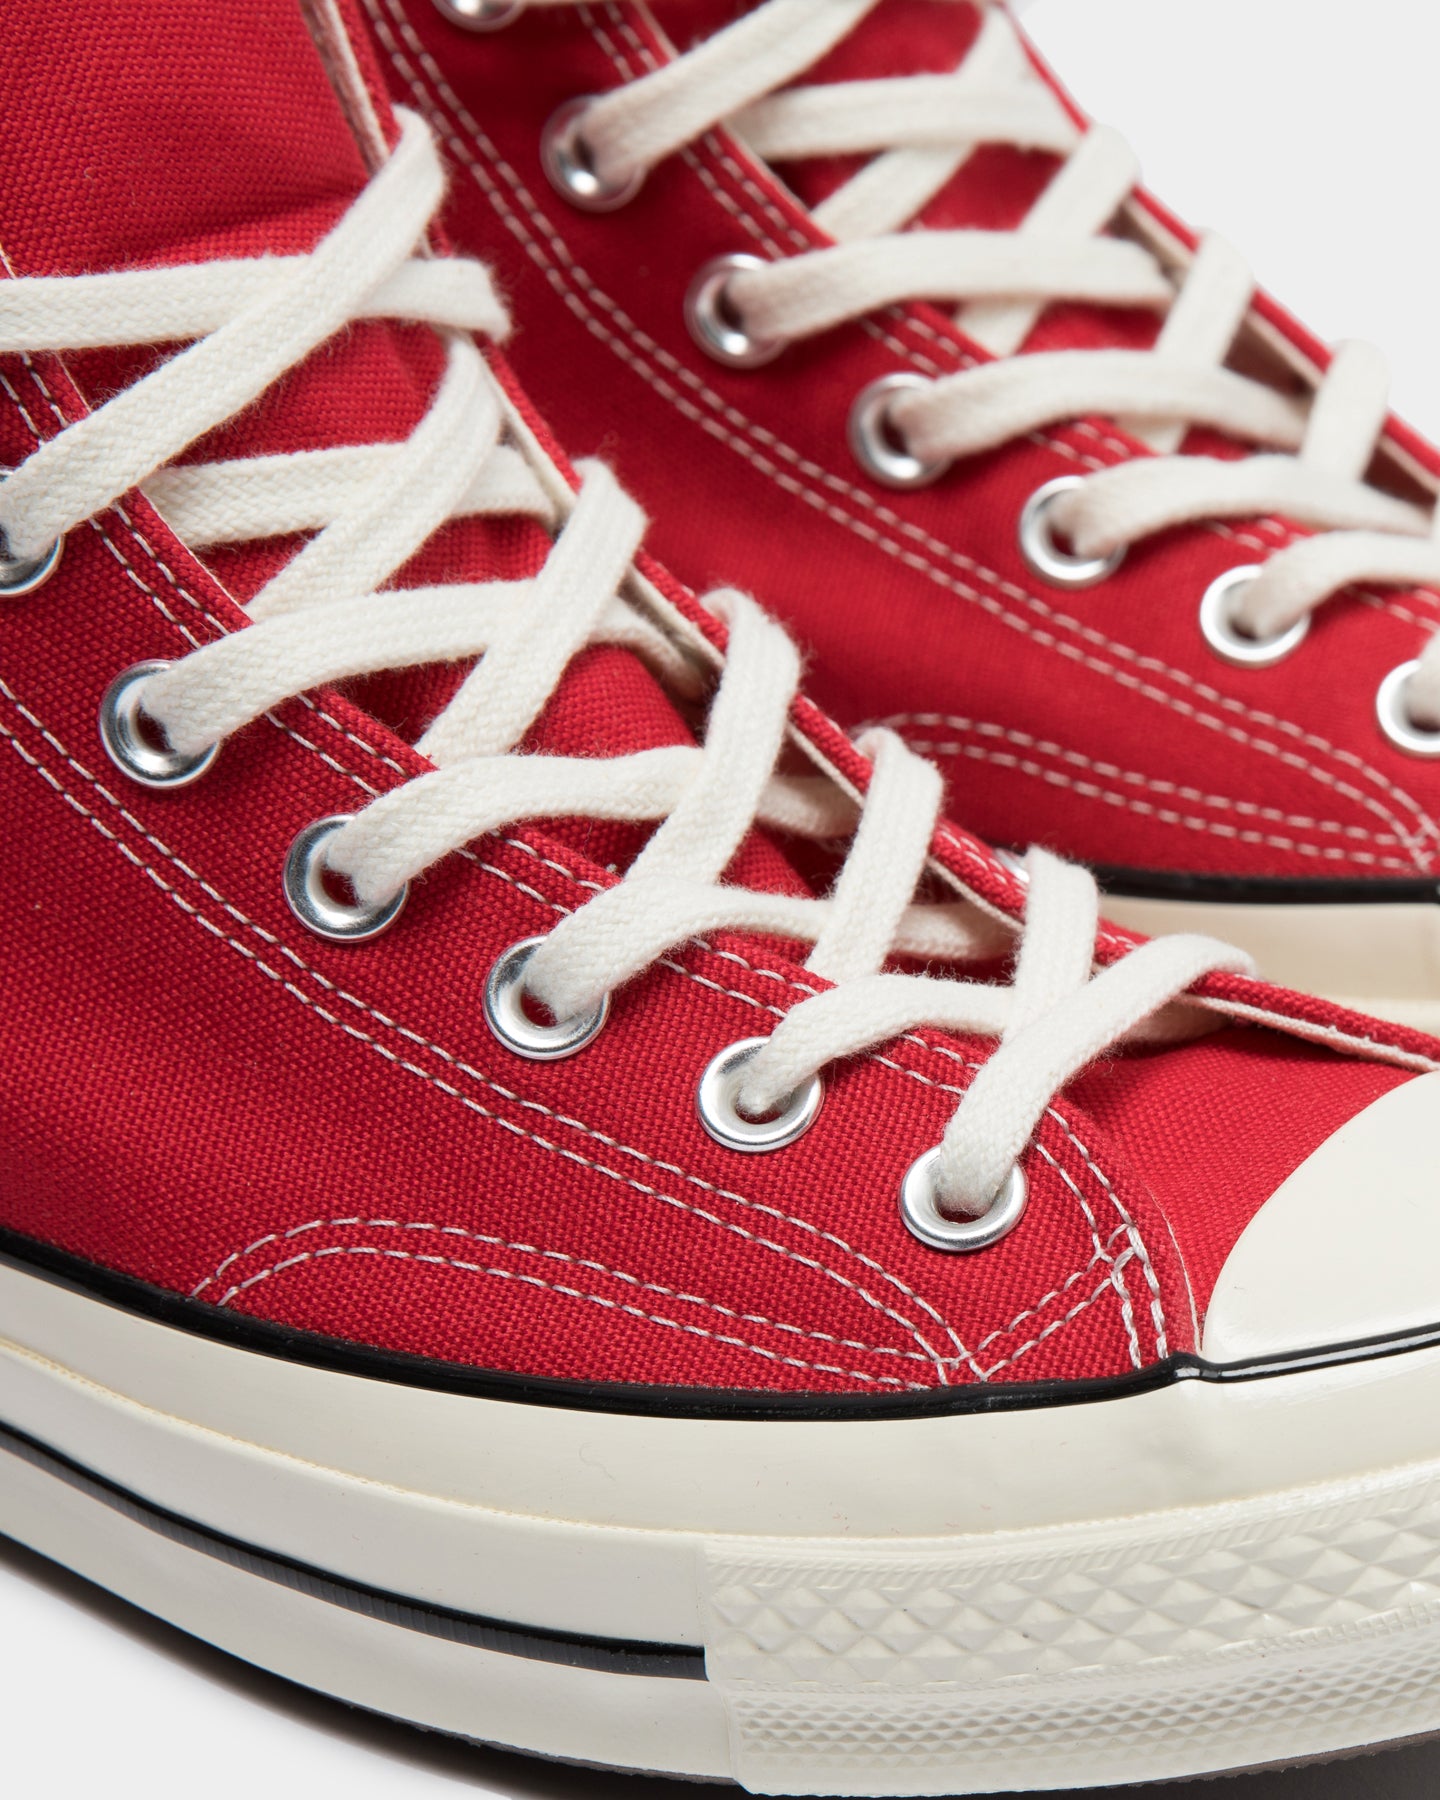 all red converse high tops